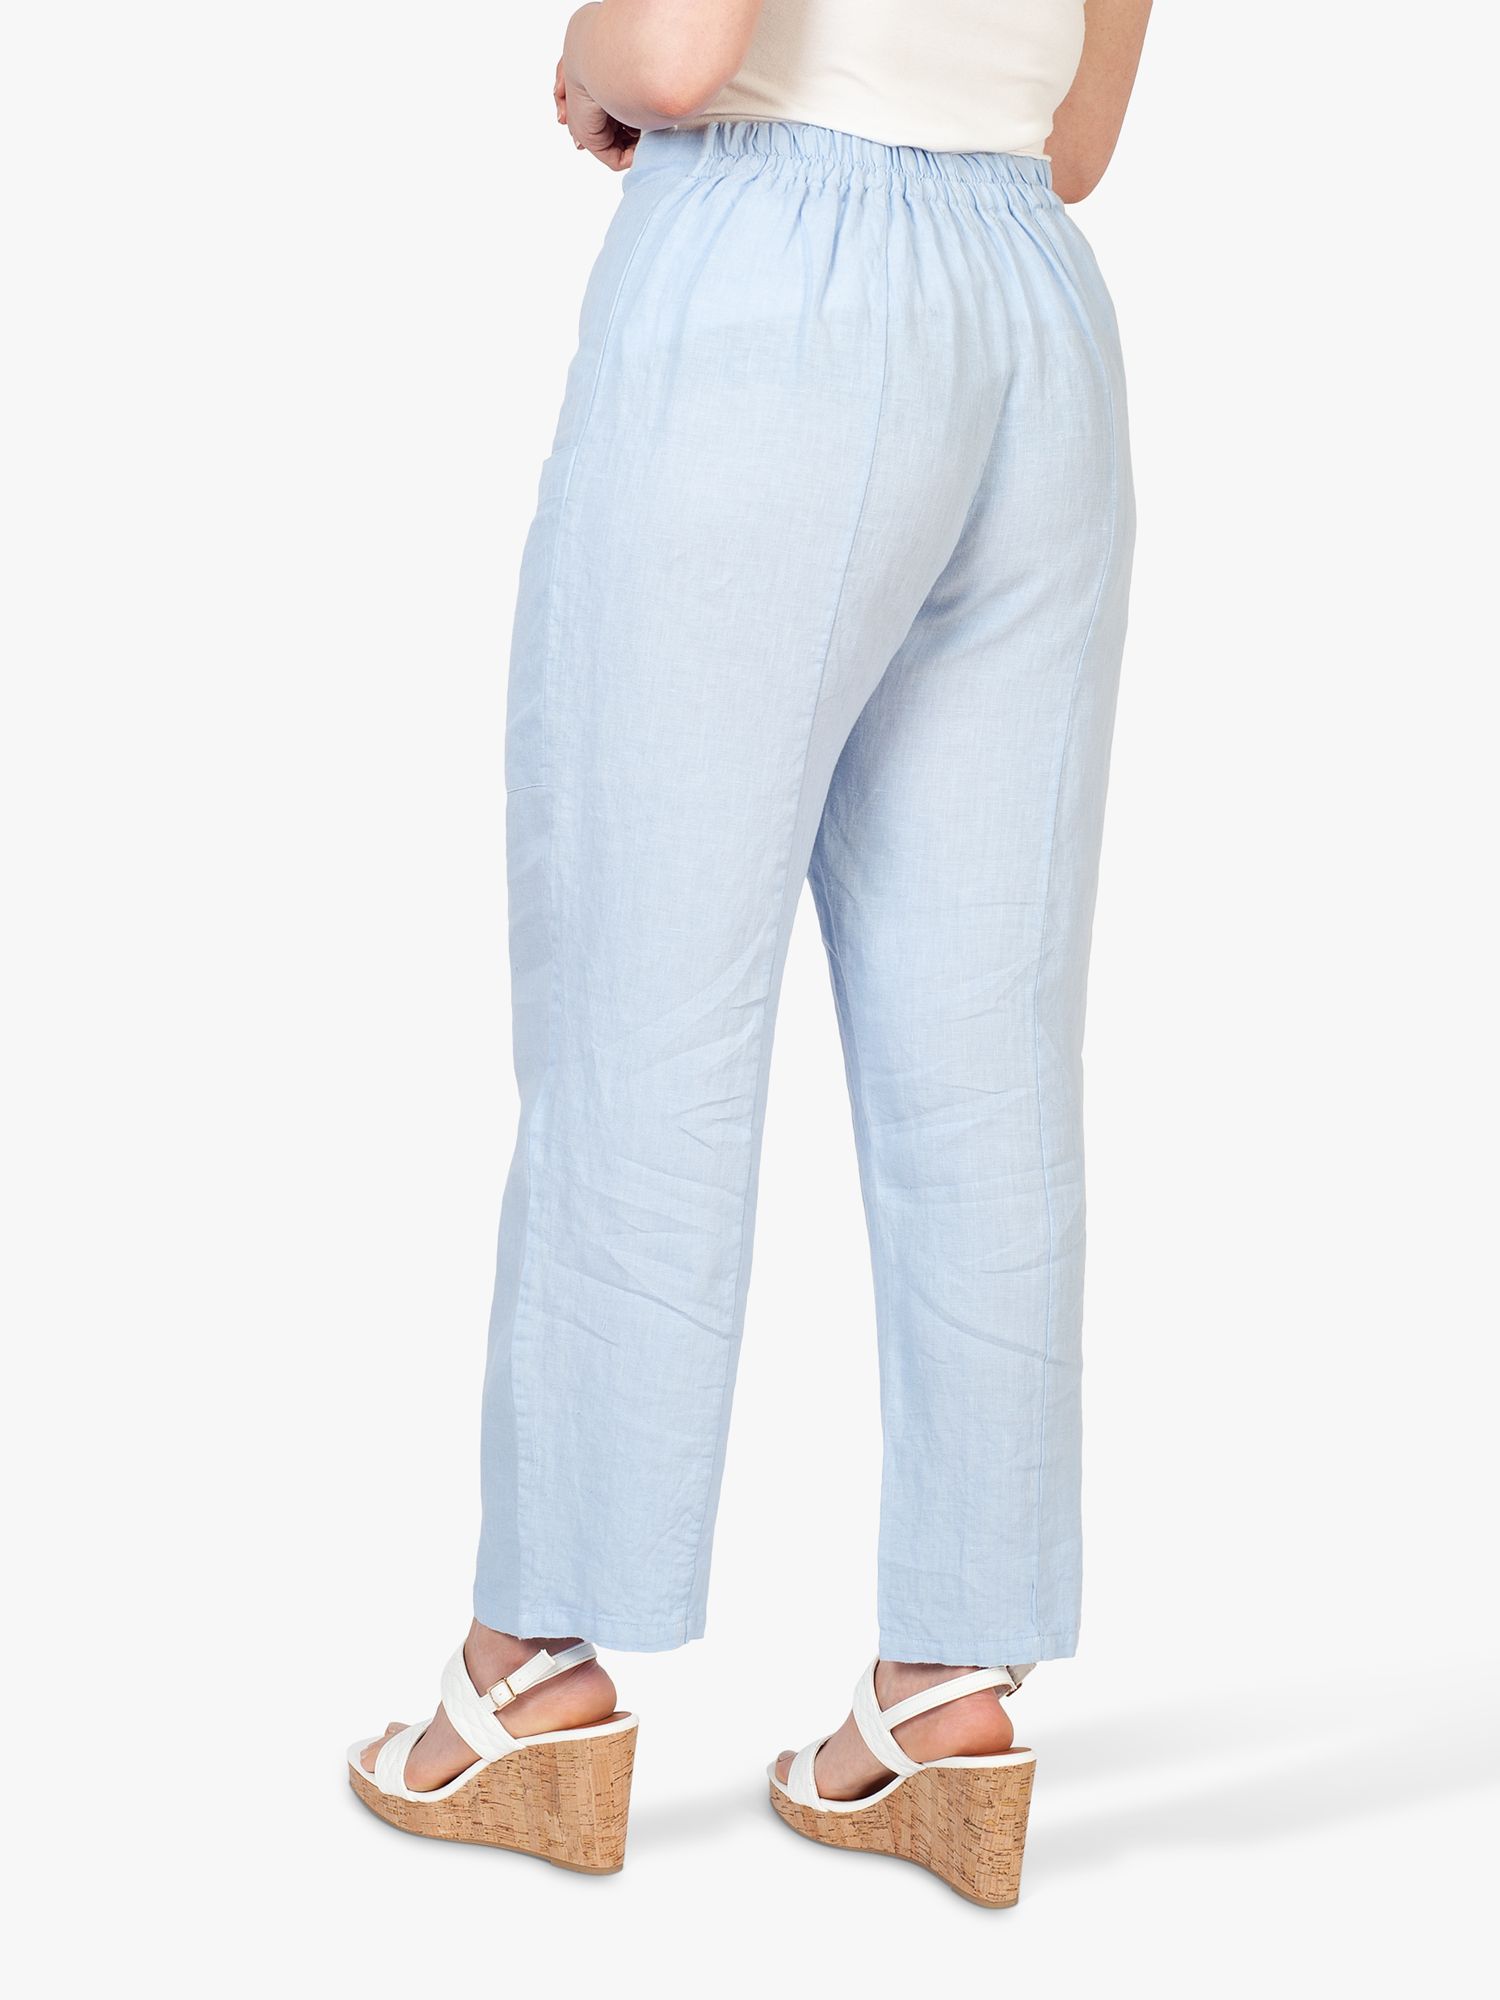 chesca Linen Straight Cut Trousers, Baby Blue, 12-14